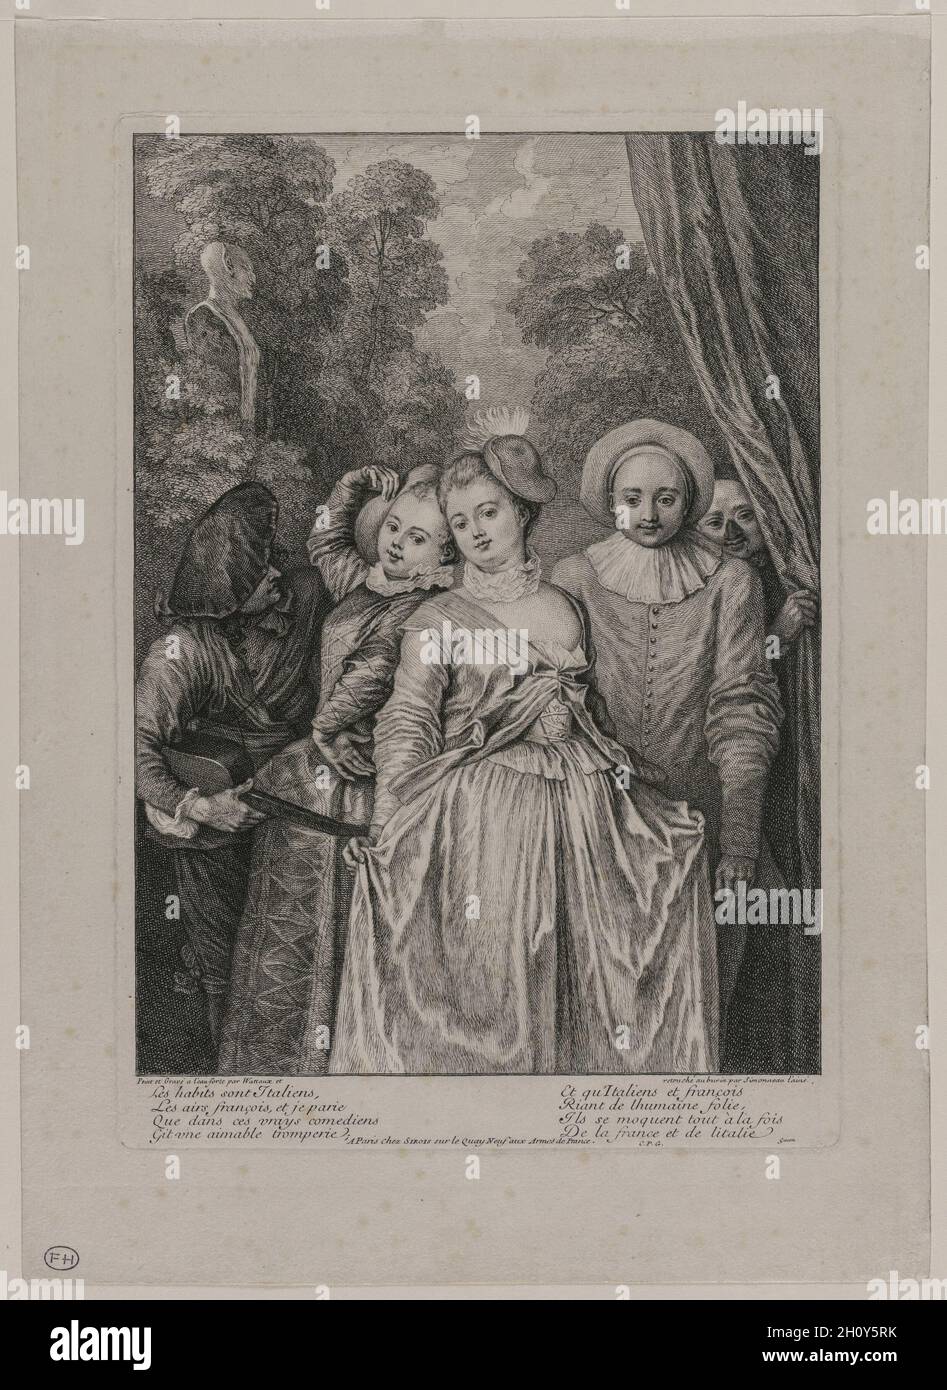 The Clothes are Italian , 1715-1716. Jean Antoine Watteau (French, 1684-1721), and Charles Simonneau (French, 1645-1728). Etching and engraving; sheet: 37.2 x 26.9 cm (14 5/8 x 10 9/16 in.); platemark: 30.5 x 21.3 cm (12 x 8 3/8 in.).  The Comédie Italienne, the Italian commedia dell’arte, took up residence in Paris in the mid-17th century, incorporating French chansons and Italian arias into their performances. The troupe was banished from France in 1697 as punishment for satirizing the regime of Louis XIV. In 1715, the crown passed to Philippe II d’Orléans, who served as Regent until Louis X Stock Photo